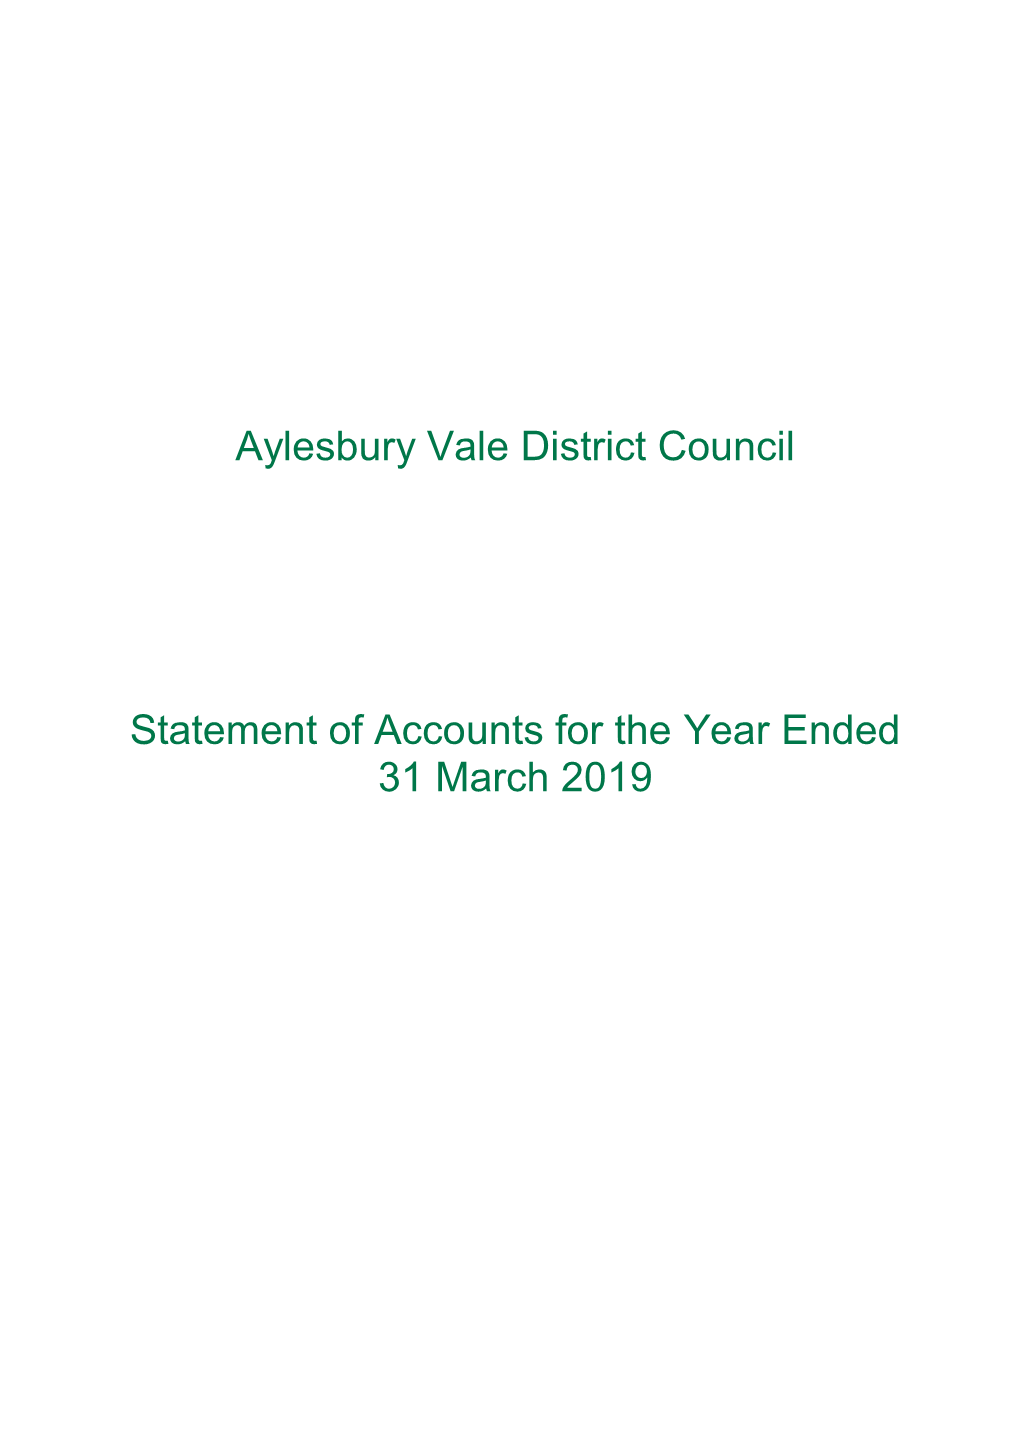 Aylesbury Vale District Council Statement of Accounts for the Year